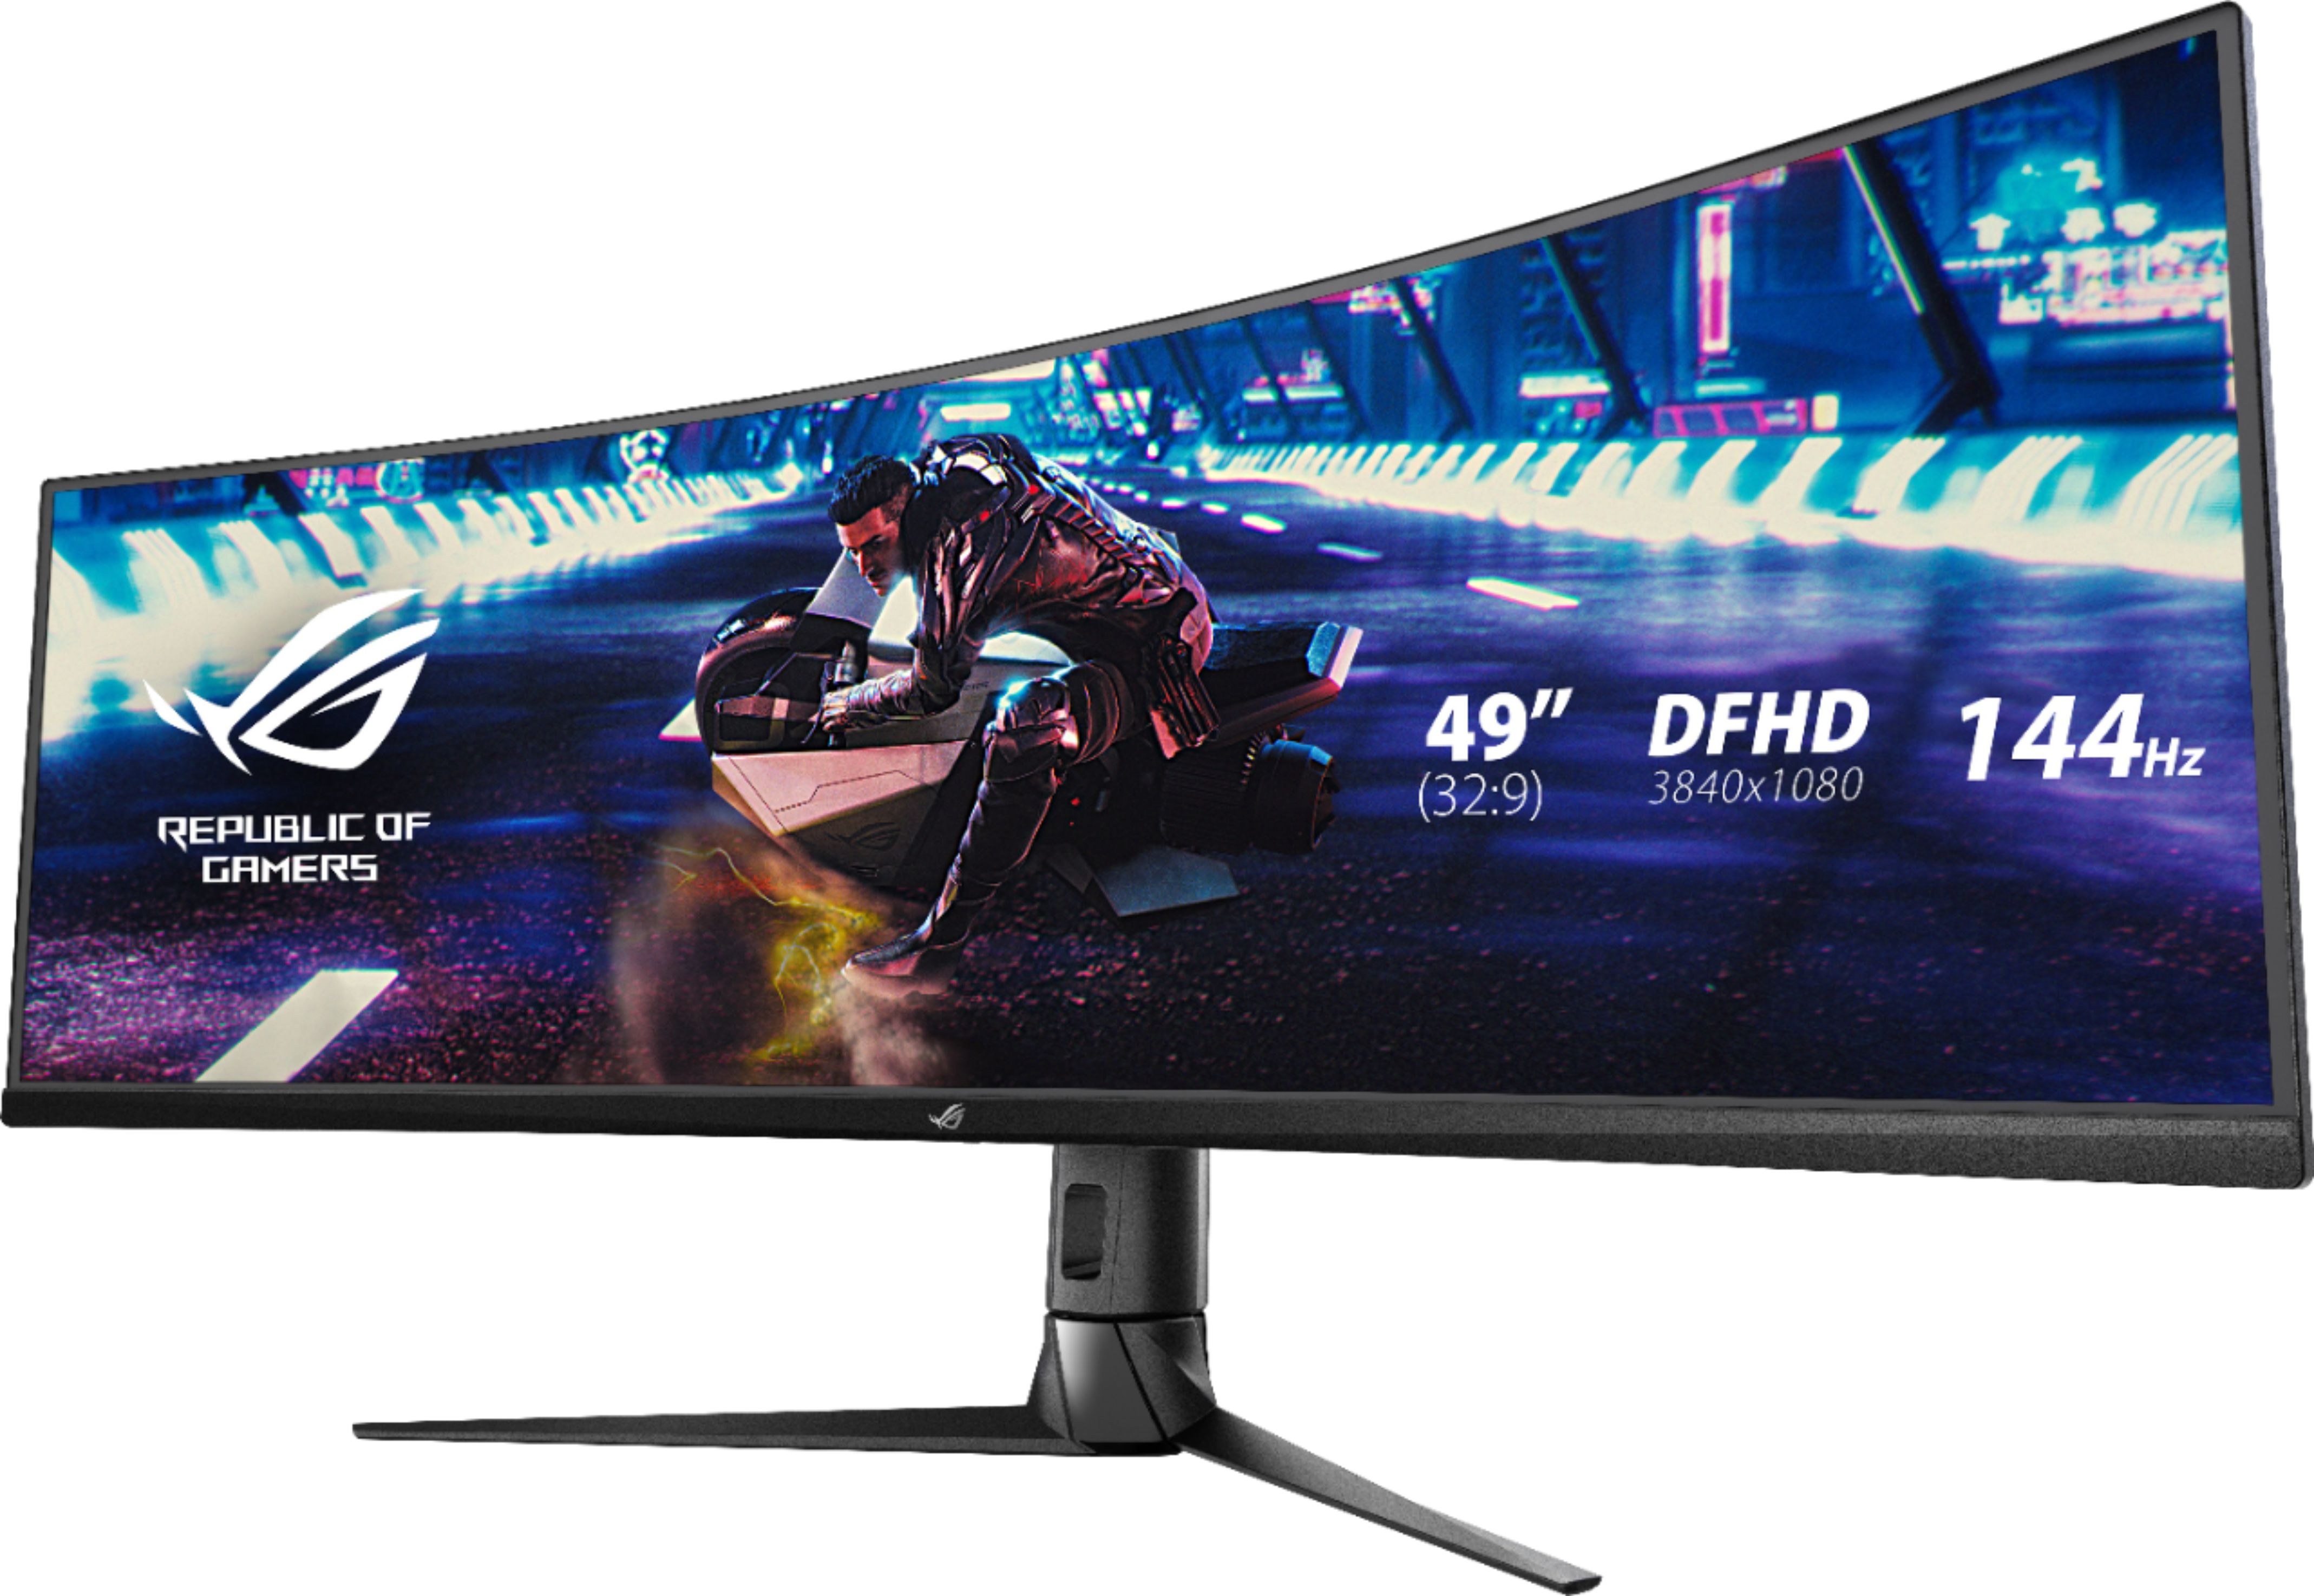 Left View: ASUS - ROG Strix 49” Curved FHD 144Hz FreeSync Gaming Monitor with HDR (DisplayPort,HDMI,USB) - Black